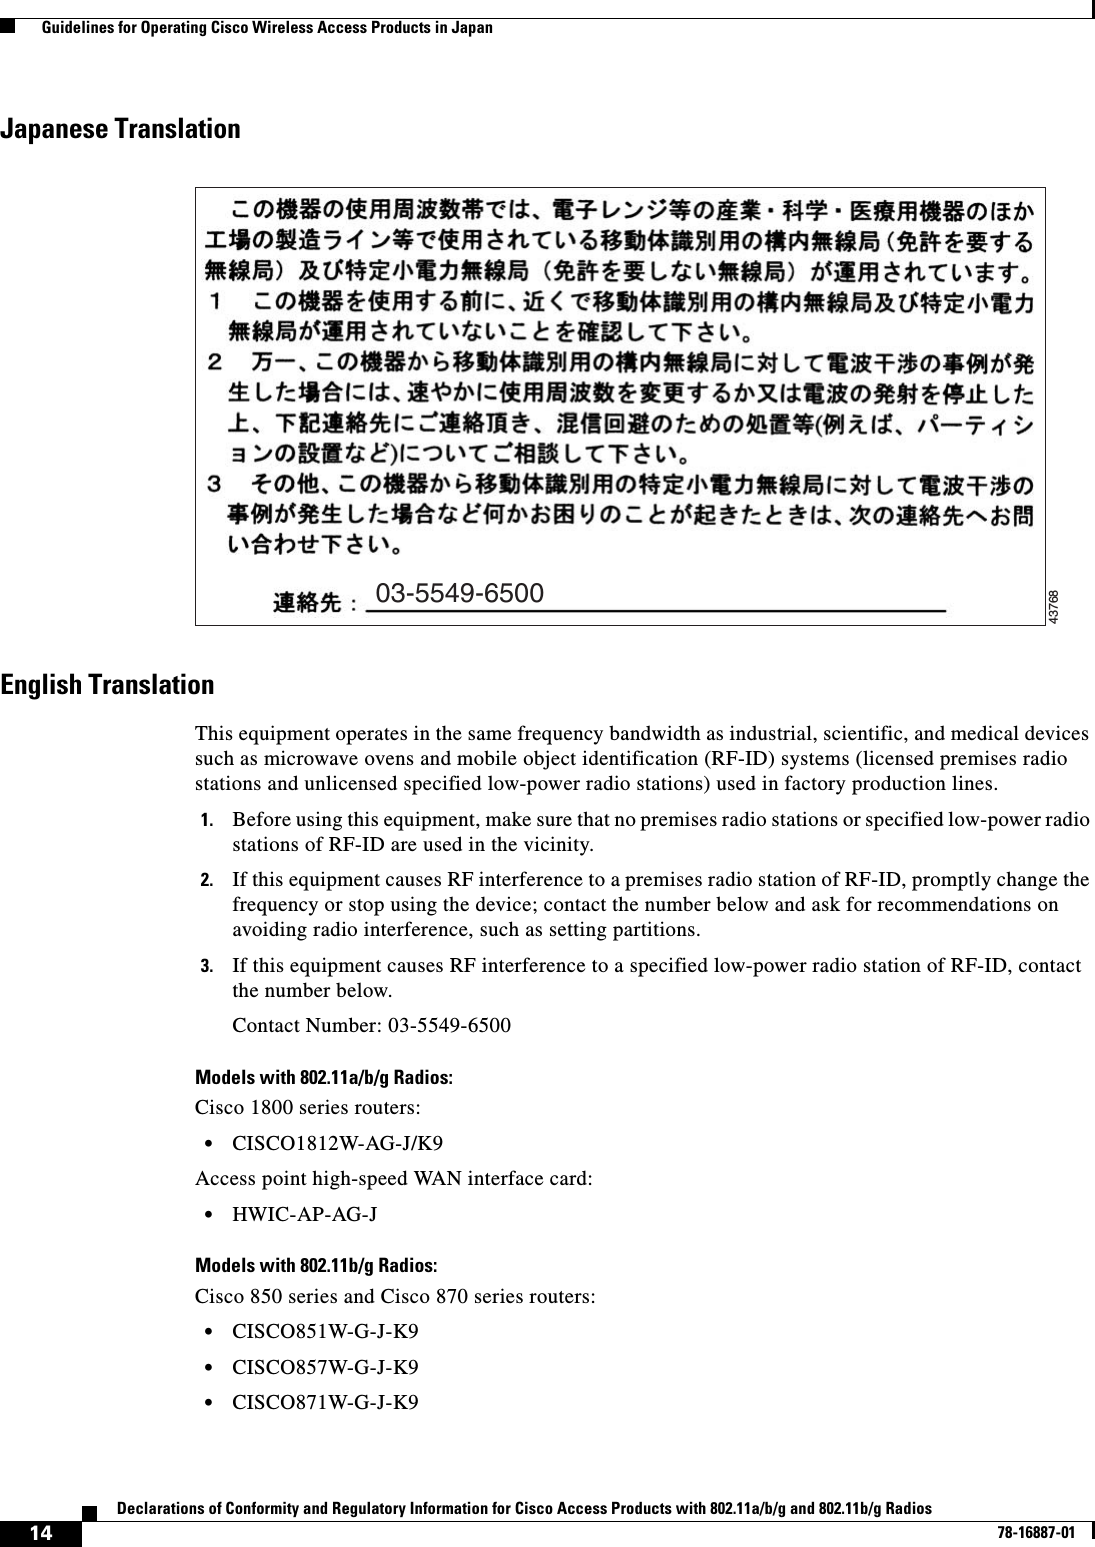  14Declarations of Conformity and Regulatory Information for Cisco Access Products with 802.11a/b/g and 802.11b/g Radios78-16887-01  Guidelines for Operating Cisco Wireless Access Products in JapanJapanese TranslationEnglish TranslationThis equipment operates in the same frequency bandwidth as industrial, scientific, and medical devices such as microwave ovens and mobile object identification (RF-ID) systems (licensed premises radio stations and unlicensed specified low-power radio stations) used in factory production lines.1. Before using this equipment, make sure that no premises radio stations or specified low-power radio stations of RF-ID are used in the vicinity.2. If this equipment causes RF interference to a premises radio station of RF-ID, promptly change the frequency or stop using the device; contact the number below and ask for recommendations on avoiding radio interference, such as setting partitions.3. If this equipment causes RF interference to a specified low-power radio station of RF-ID, contact the number below.Contact Number: 03-5549-6500Models with 802.11a/b/g Radios:Cisco 1800 series routers:•CISCO1812W-AG-J/K9Access point high-speed WAN interface card:•HWIC-AP-AG-JModels with 802.11b/g Radios:Cisco 850 series and Cisco 870 series routers:•CISCO851W-G-J-K9•CISCO857W-G-J-K9•CISCO871W-G-J-K903-5549-650043768